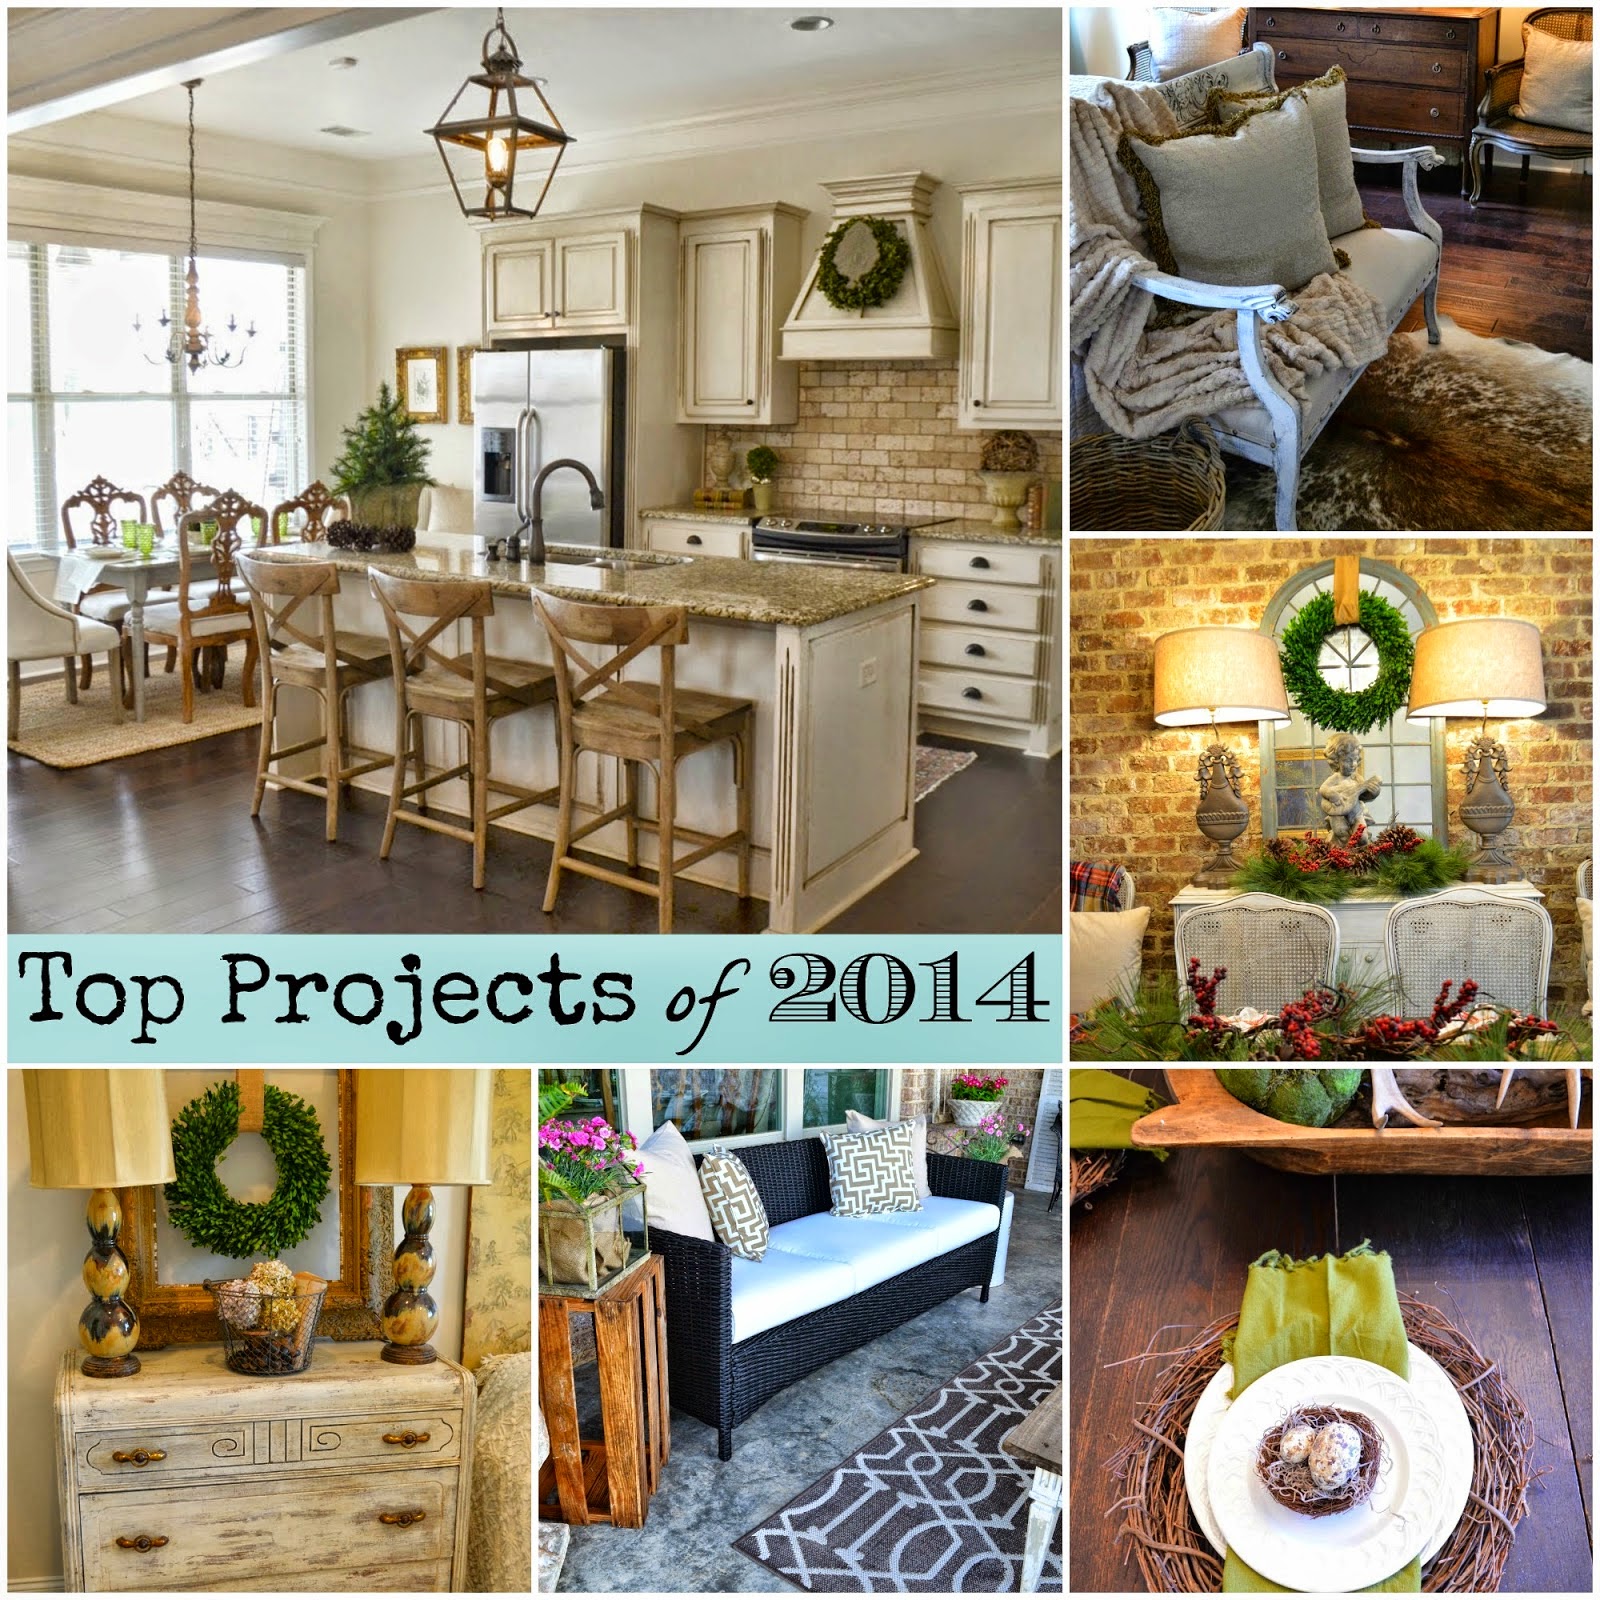 Top Projects of 2014